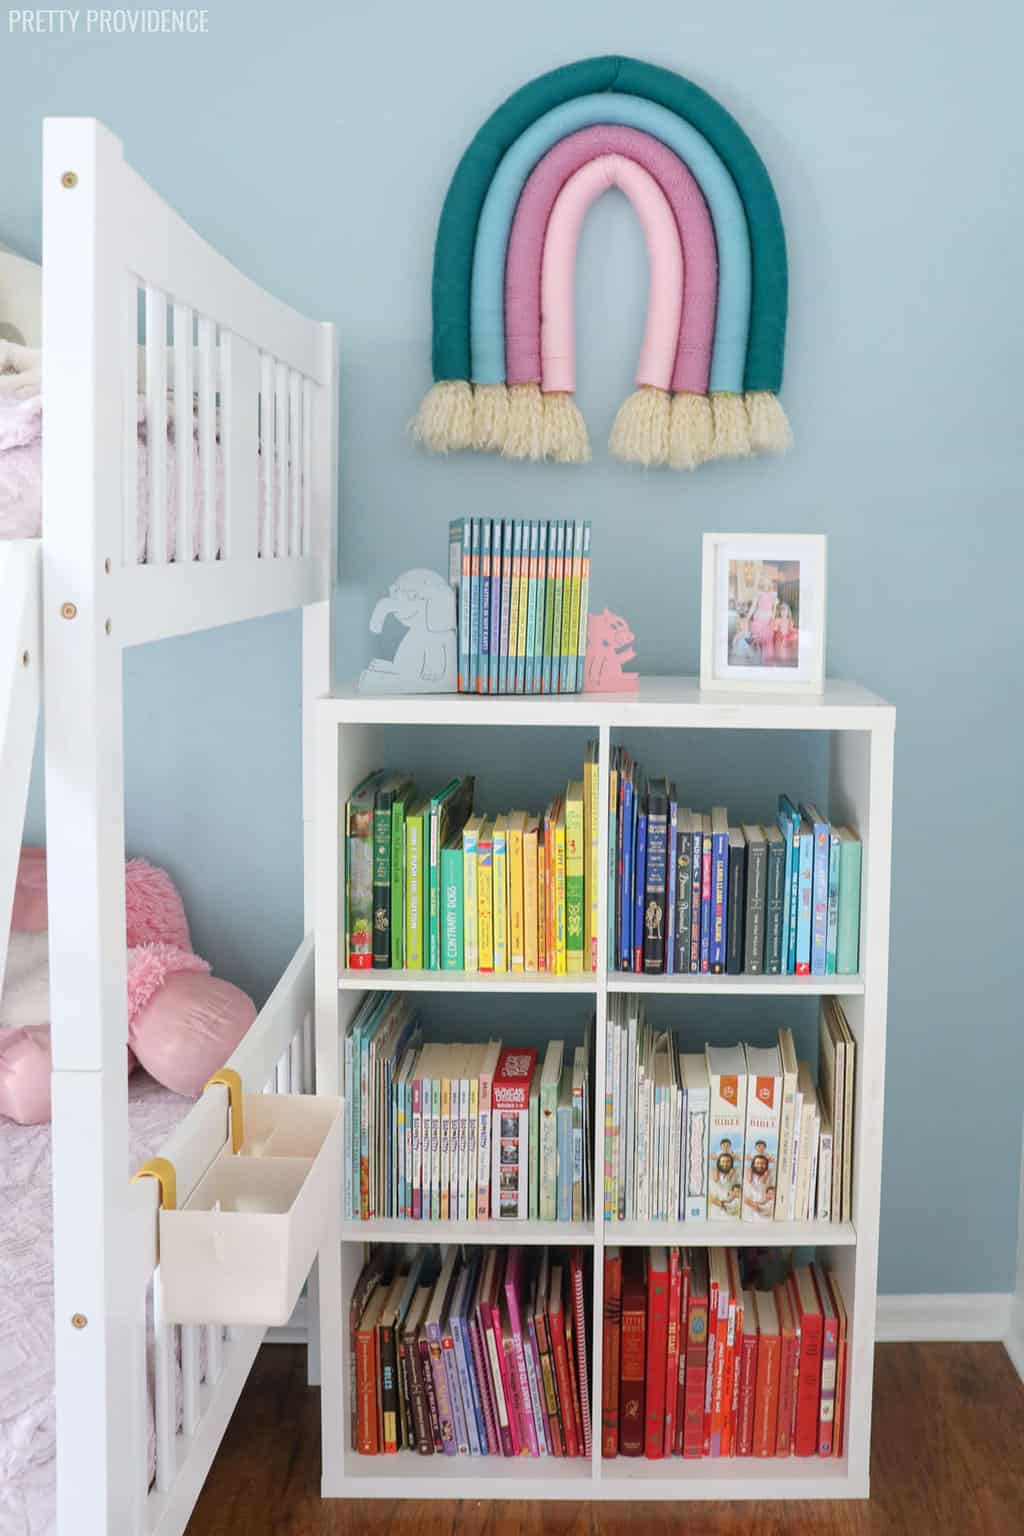 Girls bedroom with bookshelf organized by color, light blue walls.